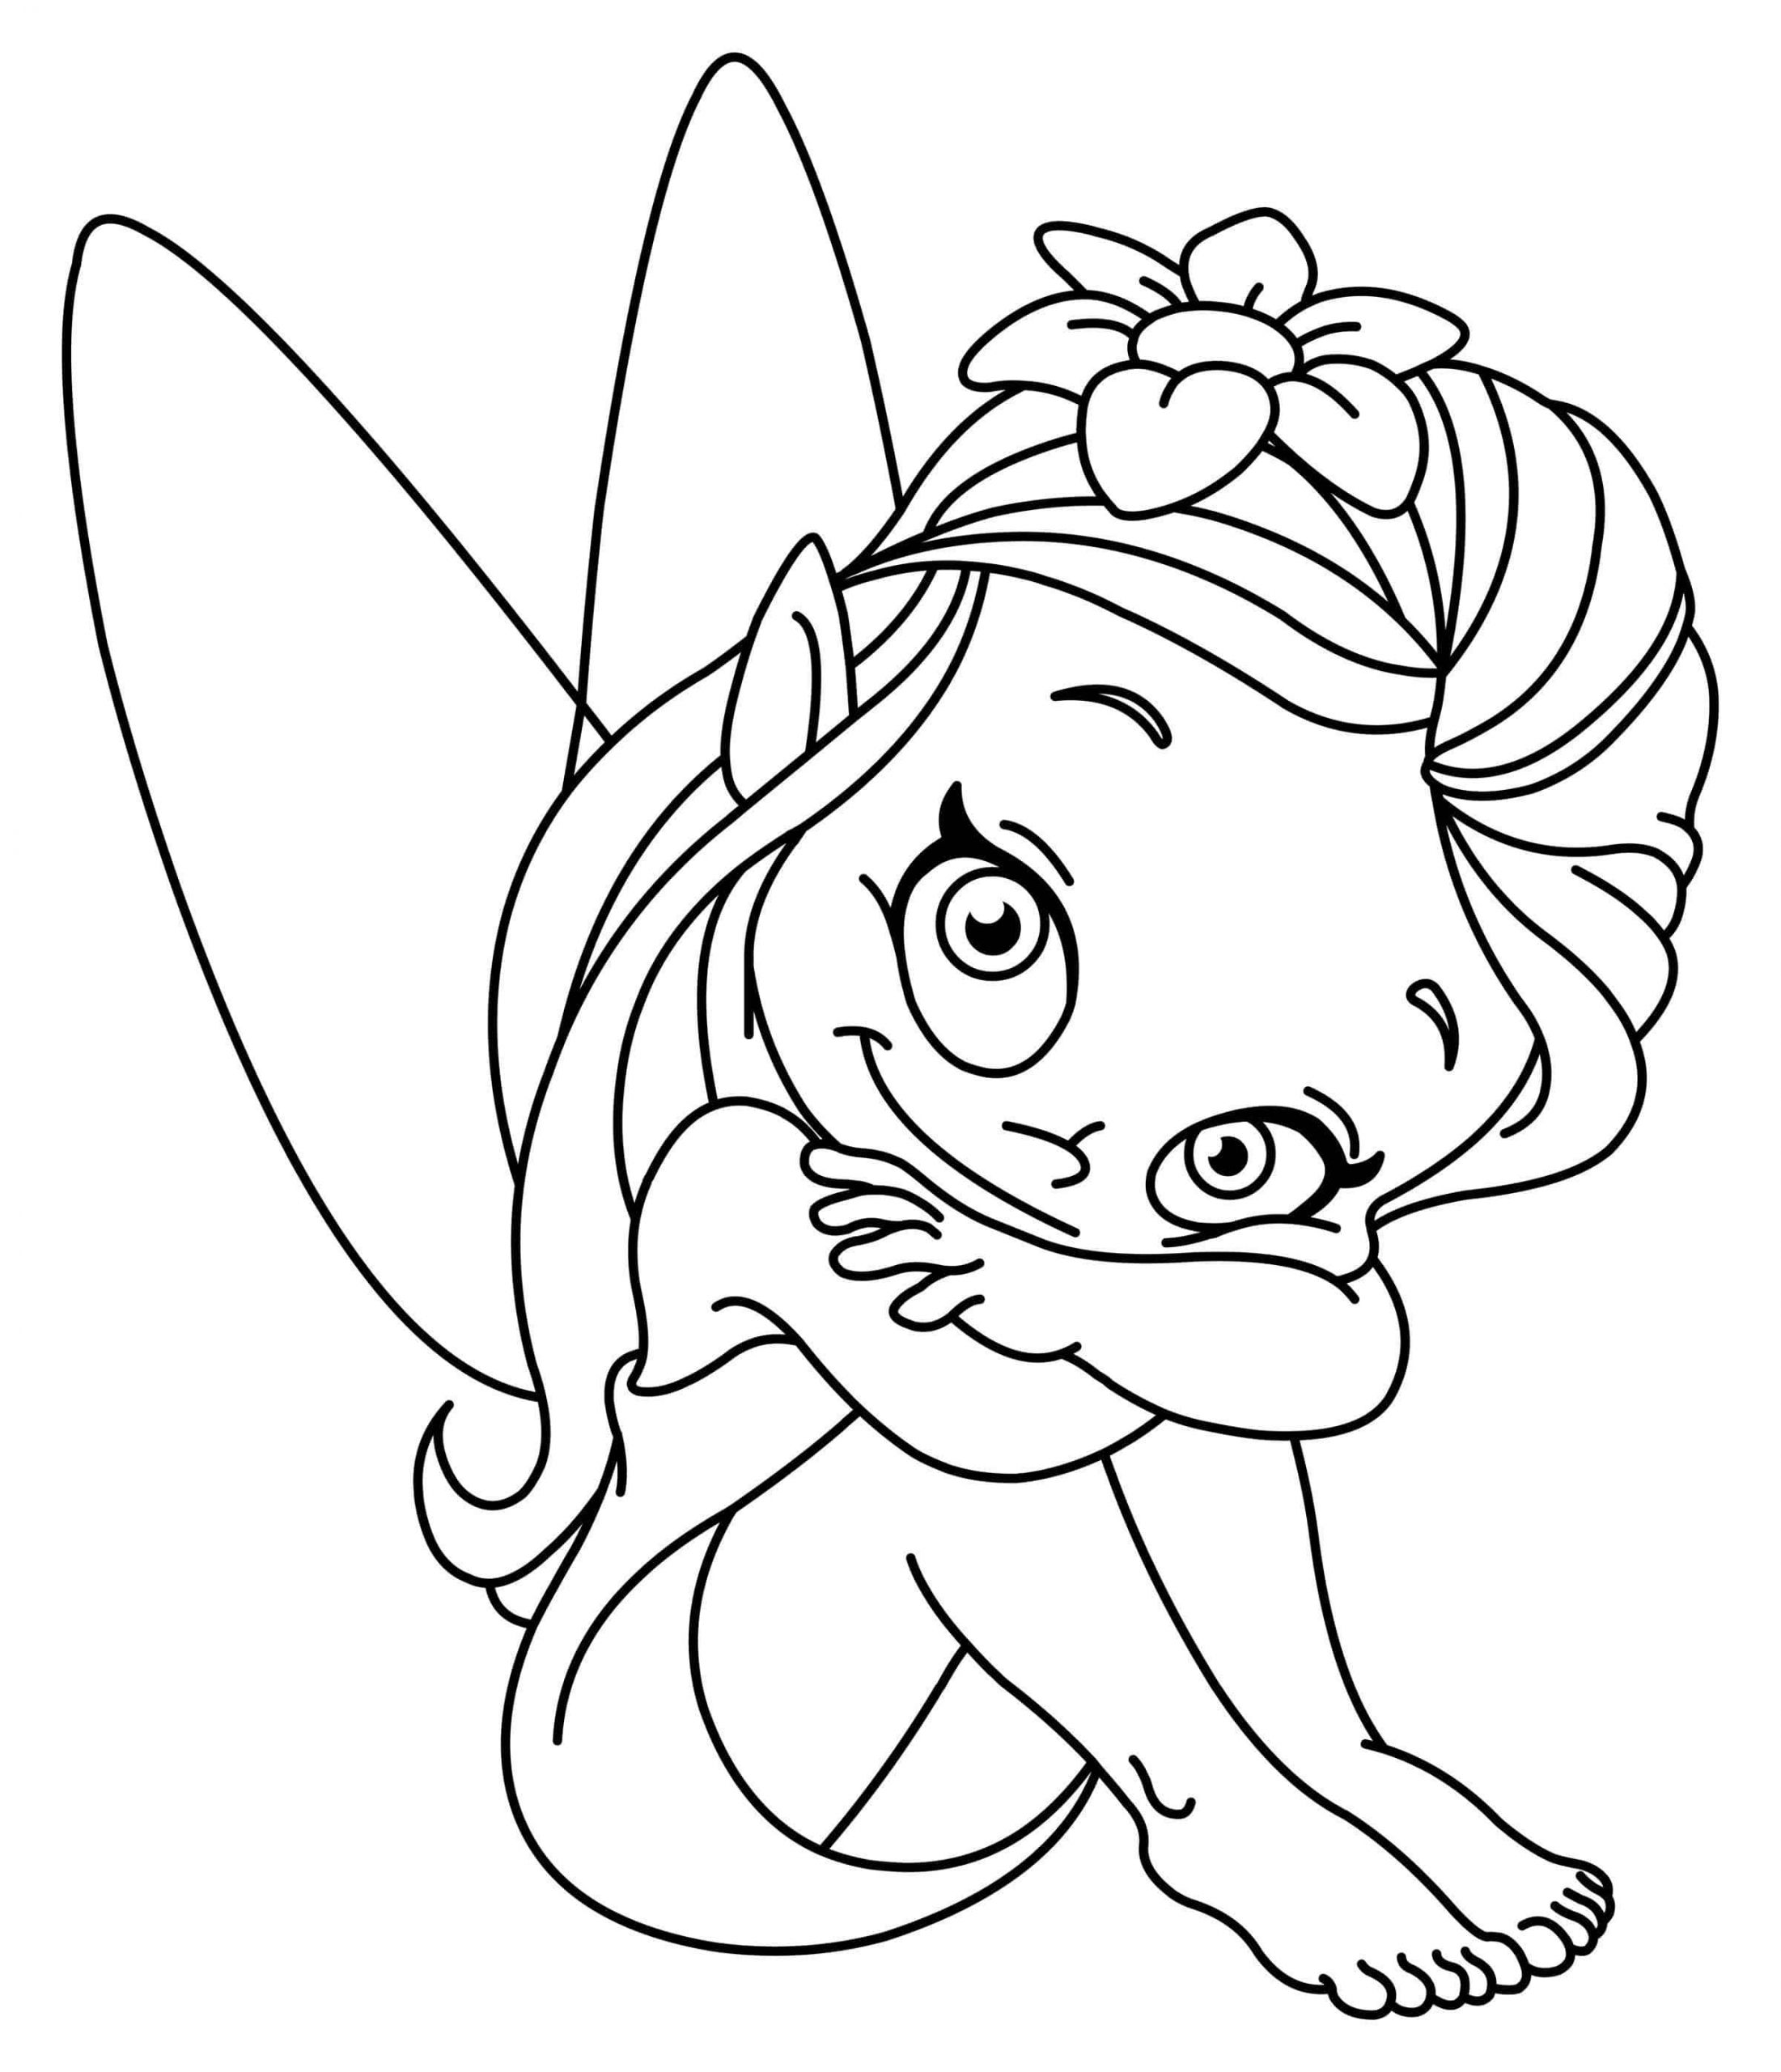 Girls Coloring Sheets
 The Best Free Coloring Pages For Girls